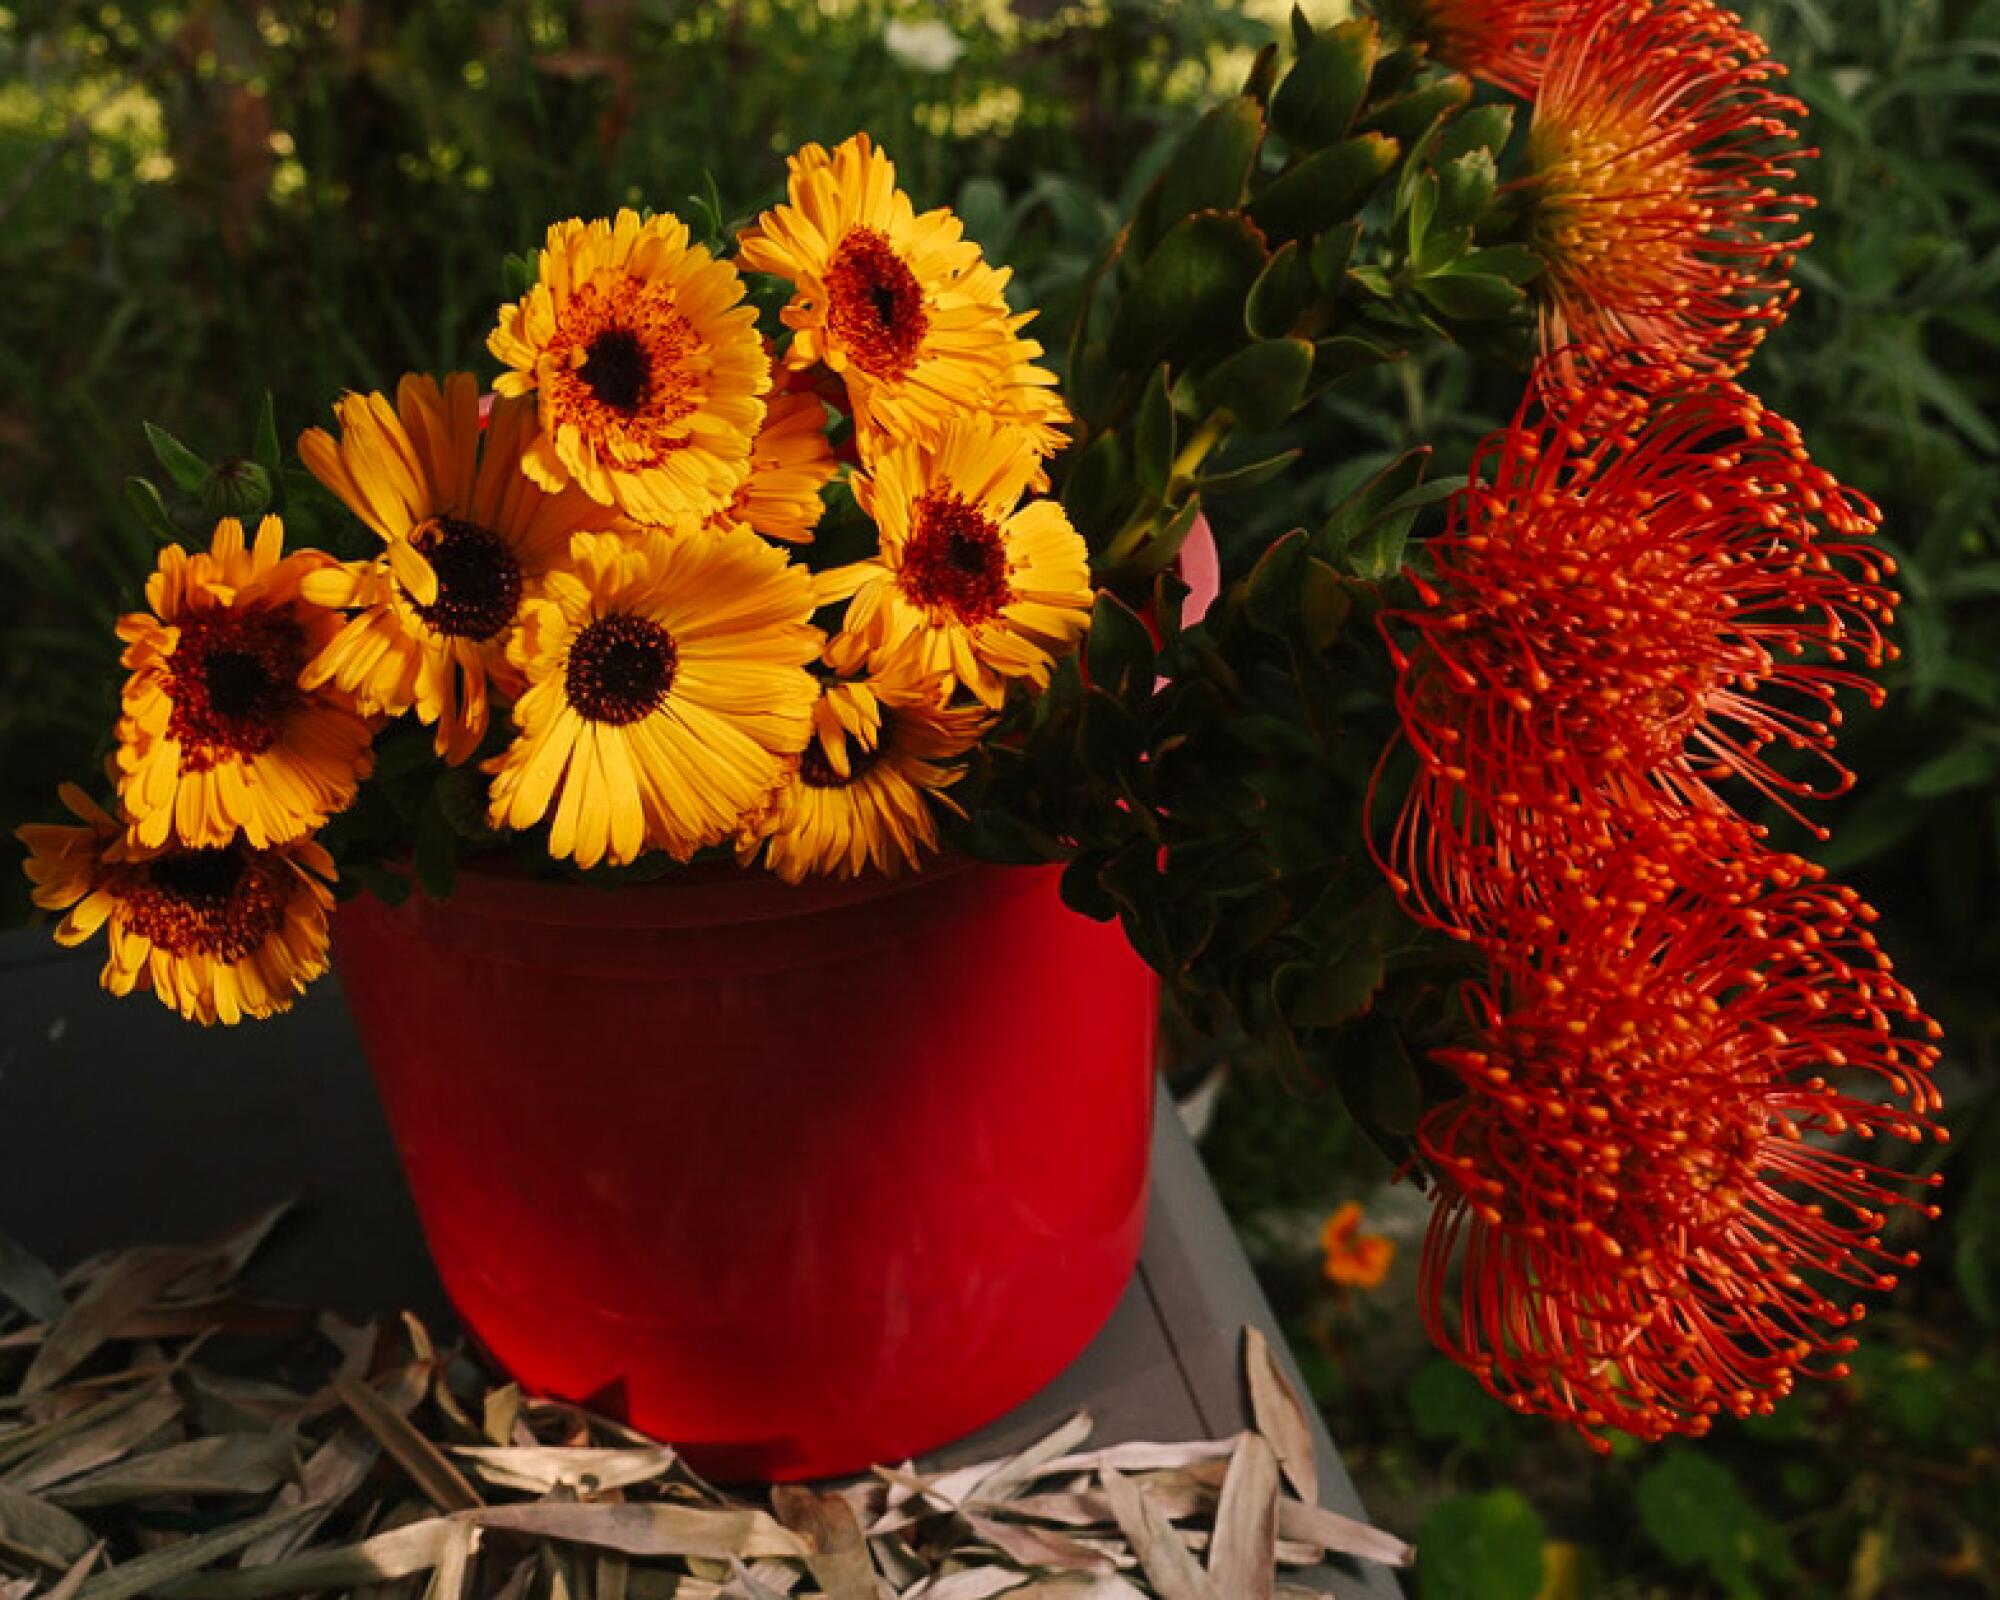 Yellow flowers and red protea in a red bucket